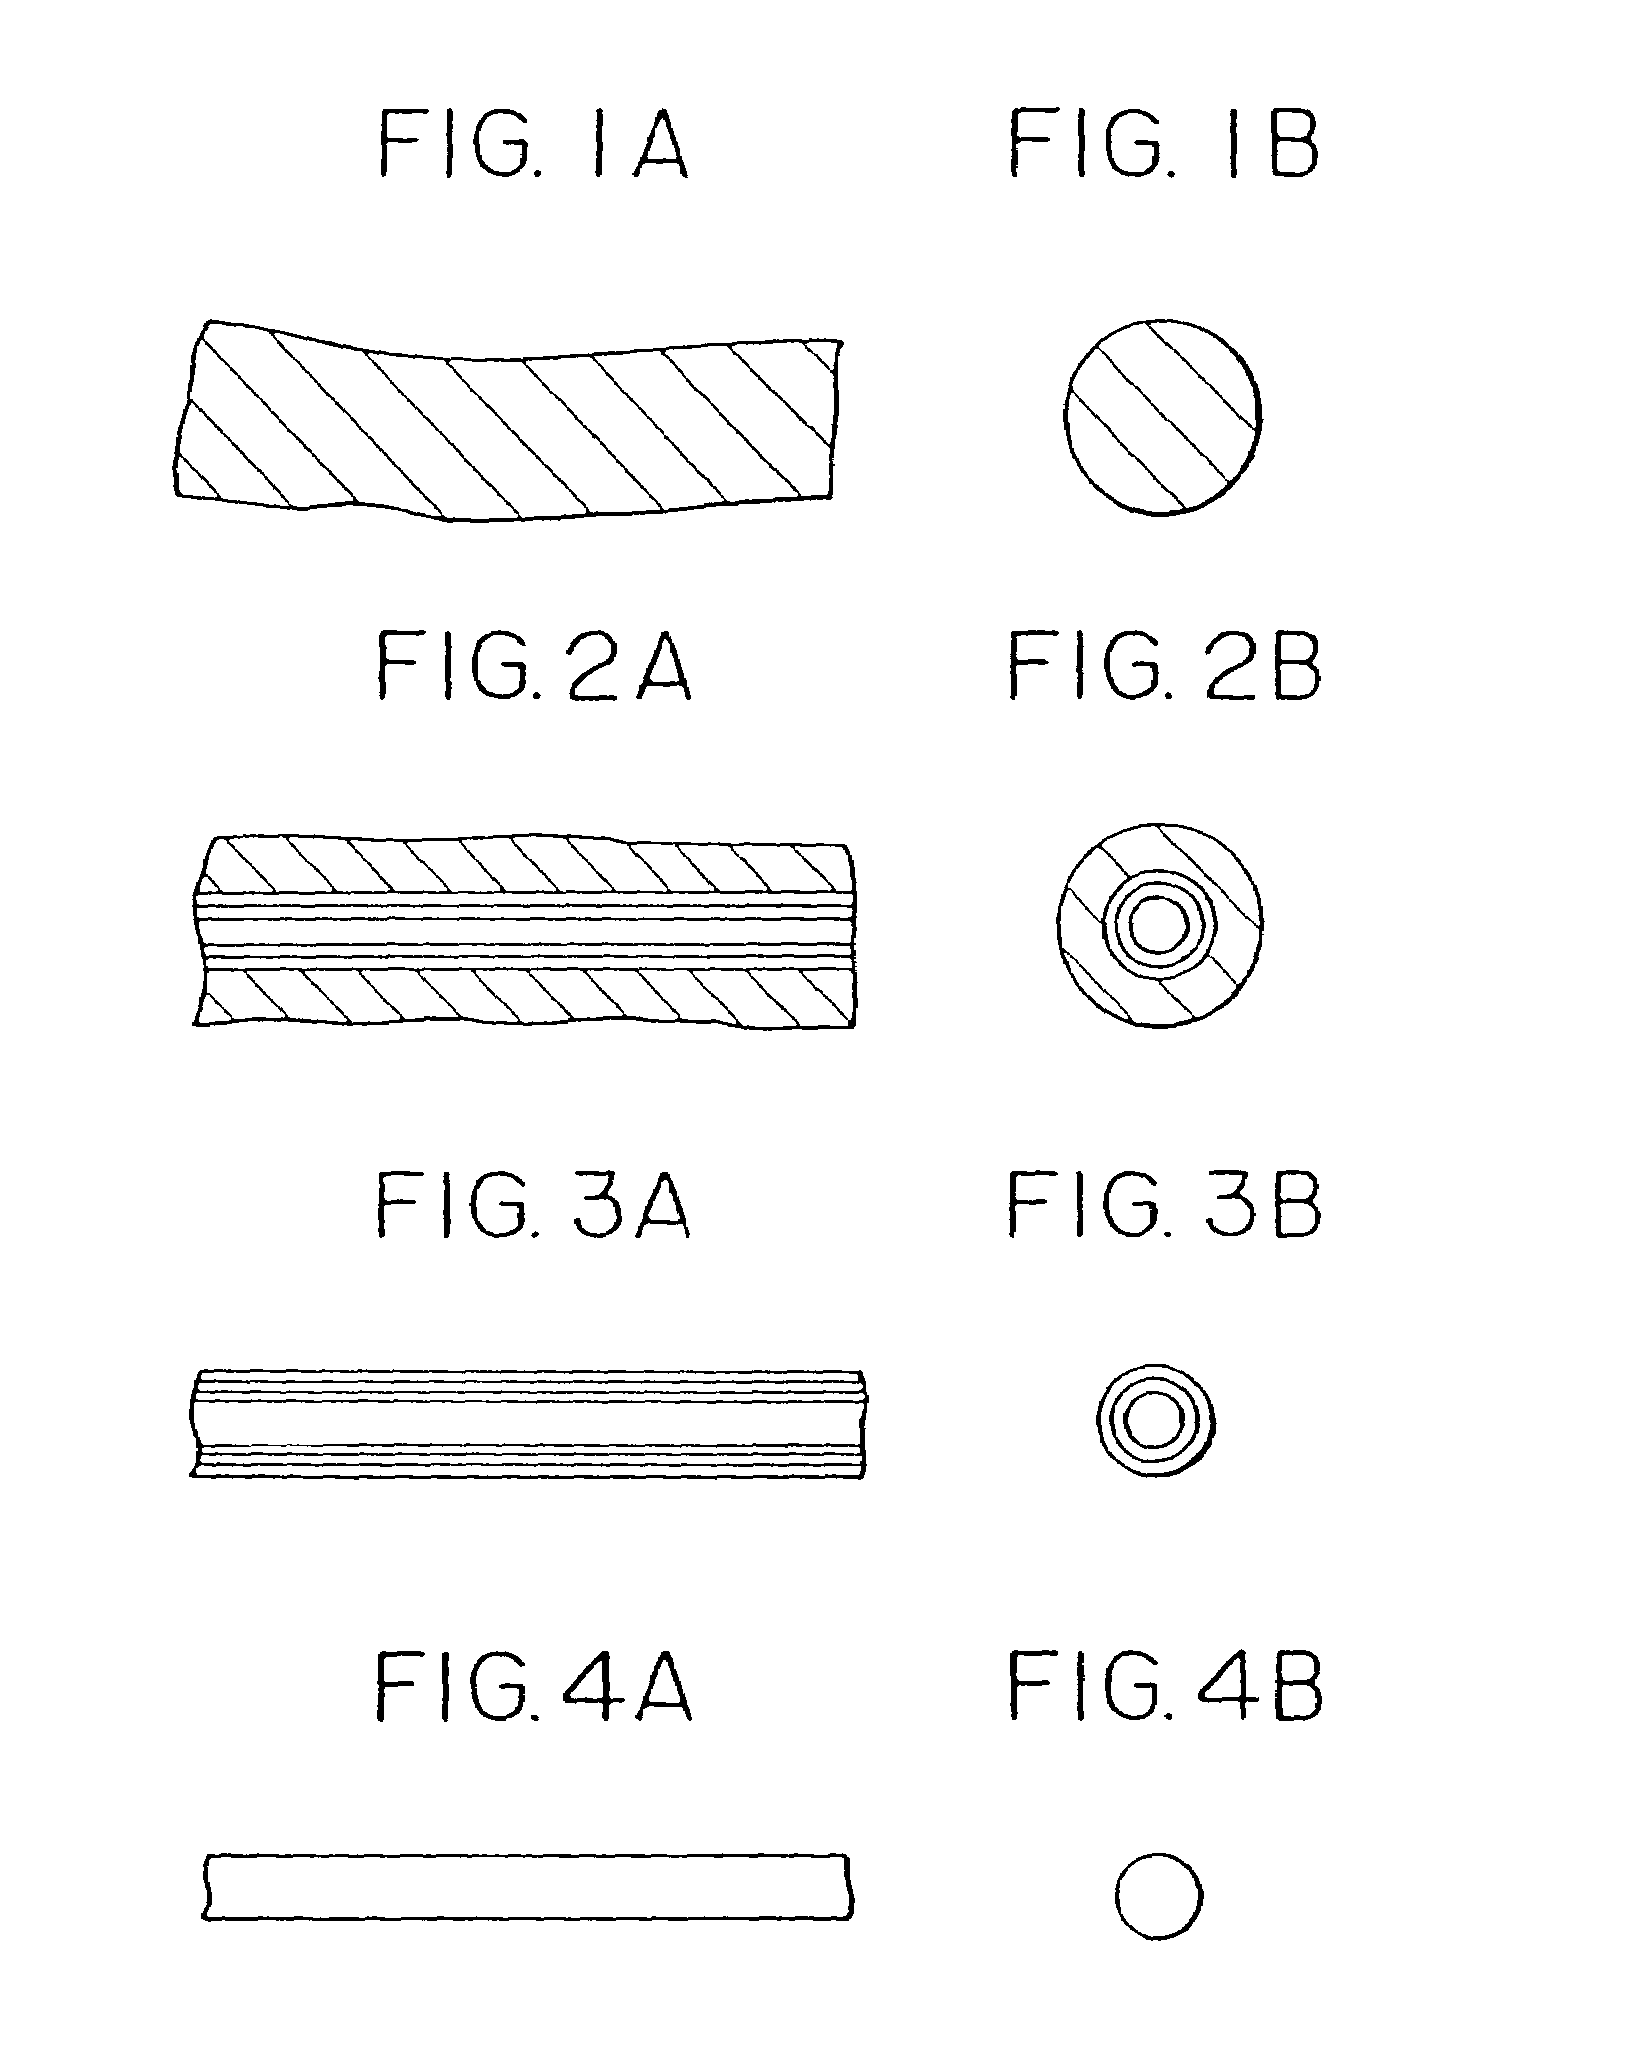 Method of manufacturing an electronic device containing a carbon nanotube